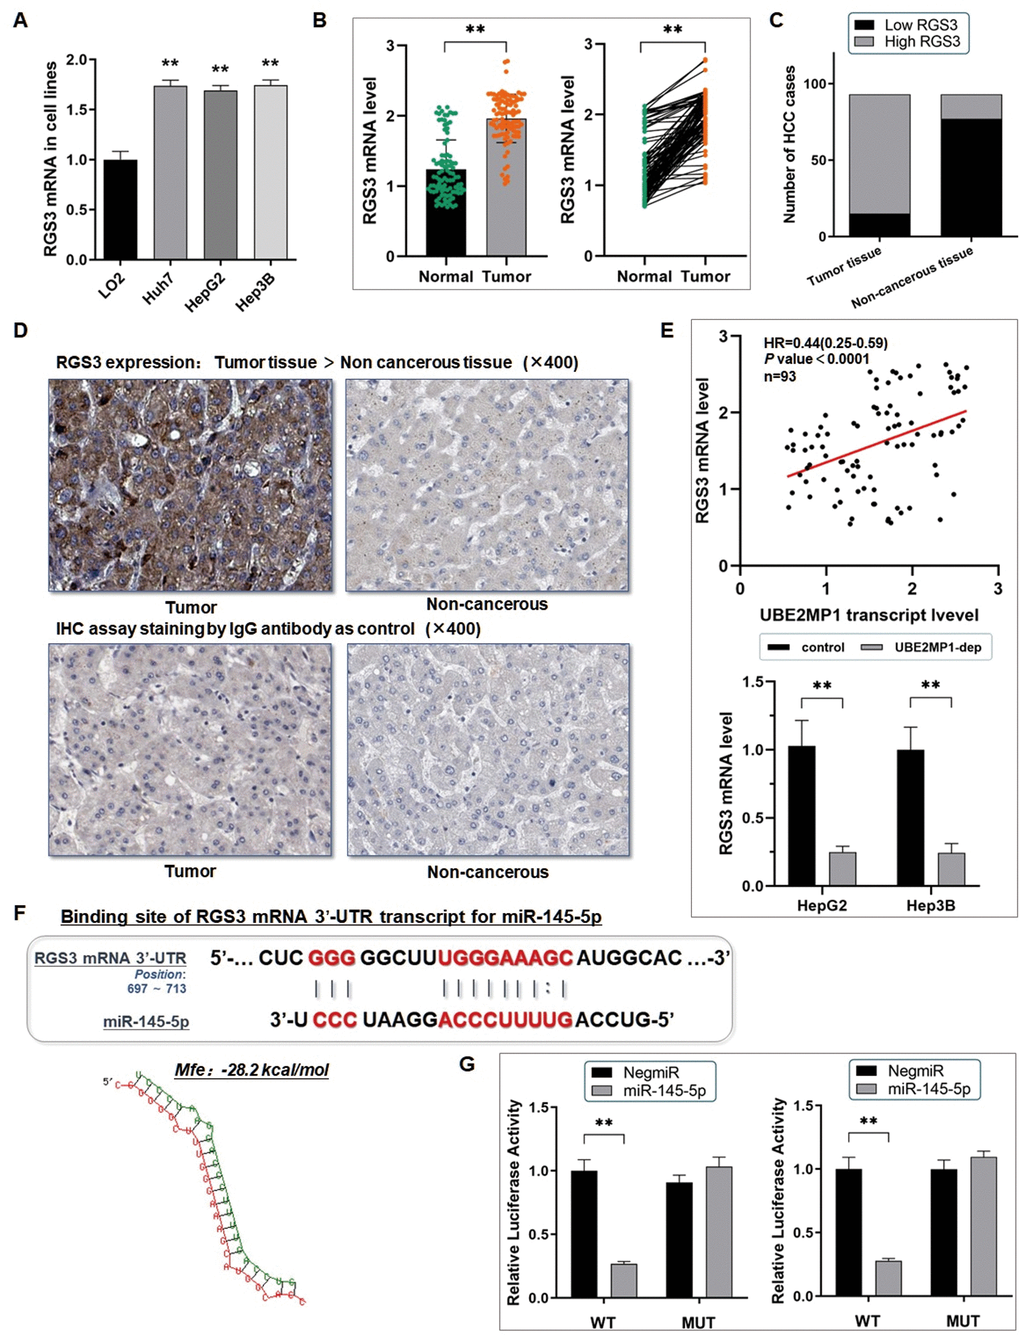 RGS3 mRNA is targeted by miR-145-5p post-transcriptionally. (A) The RT-qPCR assay demonstrated a significant up-regulation of RGS3 mRNA in three HCC cell lines, in comparison with the control LO2 cells (**PB) RT-qPCR assay was conducted on 93 real patients’ specimens. The RGS3 was significantly highly expressed in tumor tissues (**PC) Statistic of the number of cases concerning the expression of RGS3 in HCC specimens. RGS3 is highly expressed in most of the tumor tissues (78/93) (PD) Representative graph of immunohistochemistry analysis (400×) of the HCC cases. The IgG antibody was used for staining the specimens as a control. RGS3 expression in tumor specimens was significantly higher than in adjacent non-cancerous tissues. (E) RGS3 shared a positively correlated with UBE2MP1 expression in the HCC tissues from our center, and the expression of RGS3 presented a remarkable decrease in HCC cells when UBE2MP1 was depleted (**PF) Predicted binding sequence of the 3’UTR of RGS3 mRNA with miR-145-5p. The Mfe value is calculated as: -28.2 kcal/mol. (G) The dual-luciferase reporter assay verified the direct interaction between miR-145-5p and RGS3 mRNA (**P